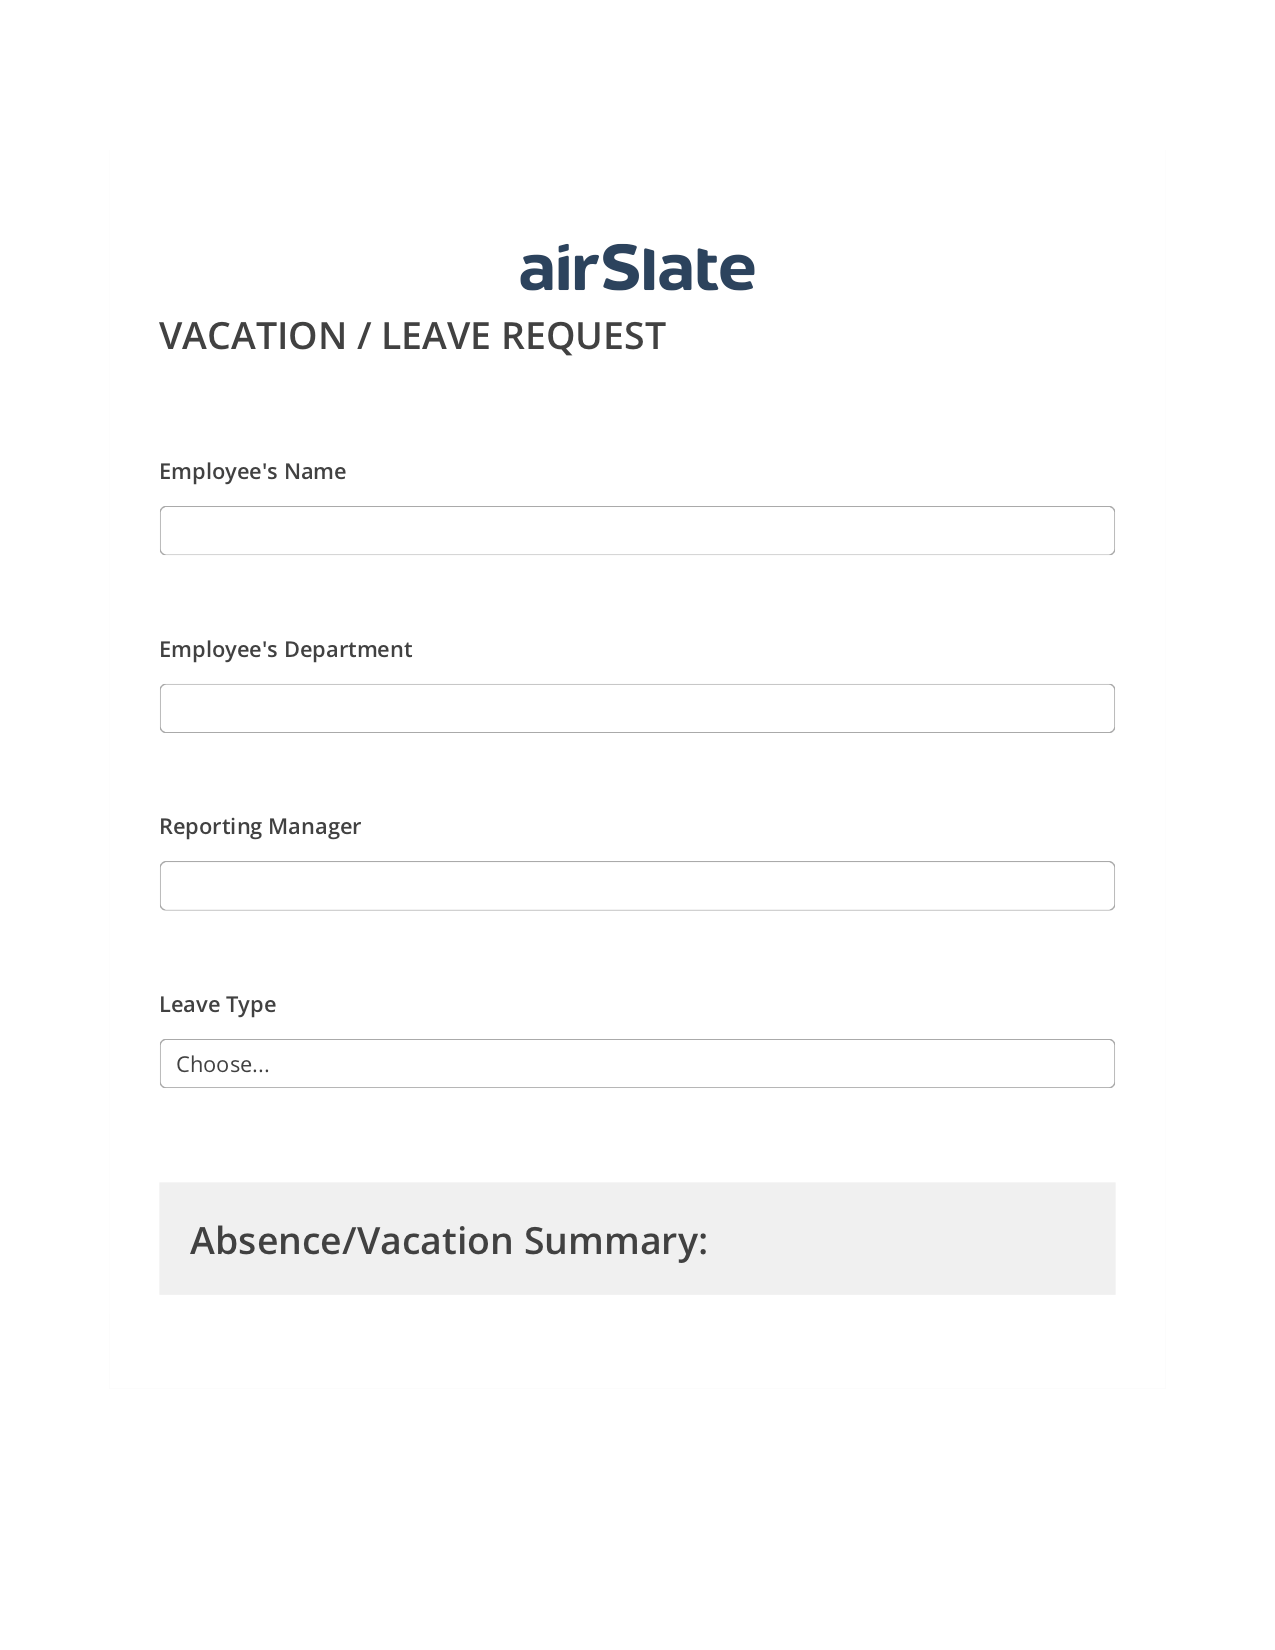 Vacation/Leave Request Workflow Pre-fill from CSV File Bot, SendGrid send Campaign bot, Export to Excel 365 Bot